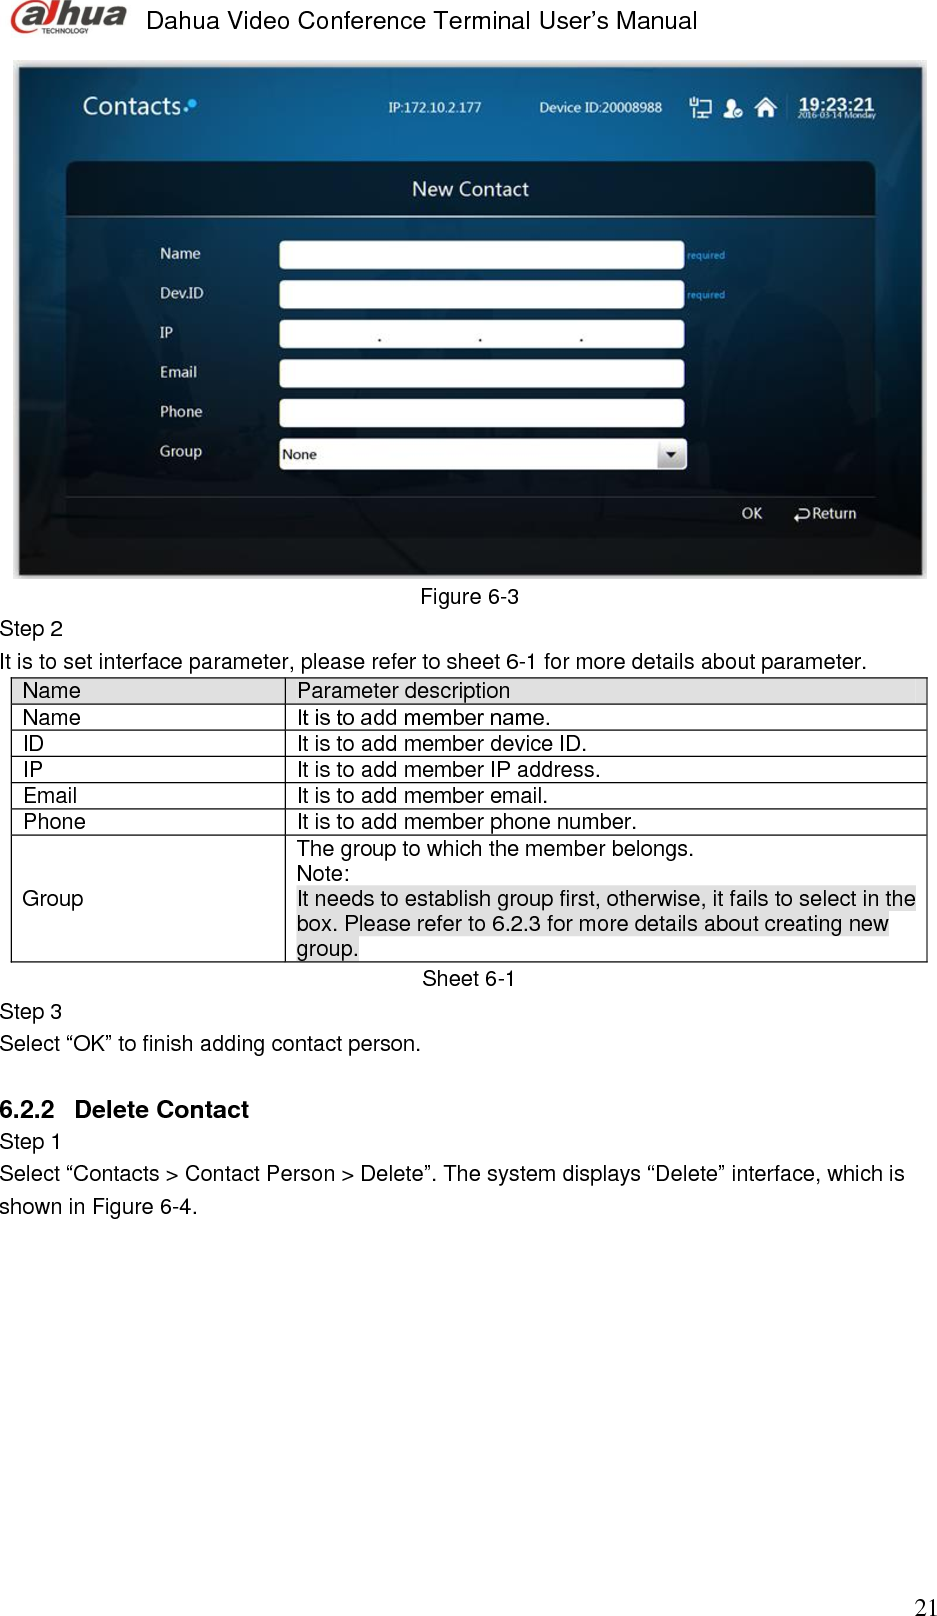  Dahua Video Conference Terminal User’s Manual                                                                              21  Figure 6-3 Step 2  It is to set interface parameter, please refer to sheet 6-1 for more details about parameter.  Name Parameter description Name  It is to add member name.  ID It is to add member device ID.  IP It is to add member IP address. Email  It is to add member email. Phone It is to add member phone number. Group  The group to which the member belongs. Note:  It needs to establish group first, otherwise, it fails to select in the box. Please refer to 6.2.3 for more details about creating new group.    Sheet 6-1 Step 3  Select “OK” to finish adding contact person.  6.2.2  Delete Contact  Step 1  Select “Contacts &gt; Contact Person &gt; Delete”. The system displays “Delete” interface, which is shown in Figure 6-4.  